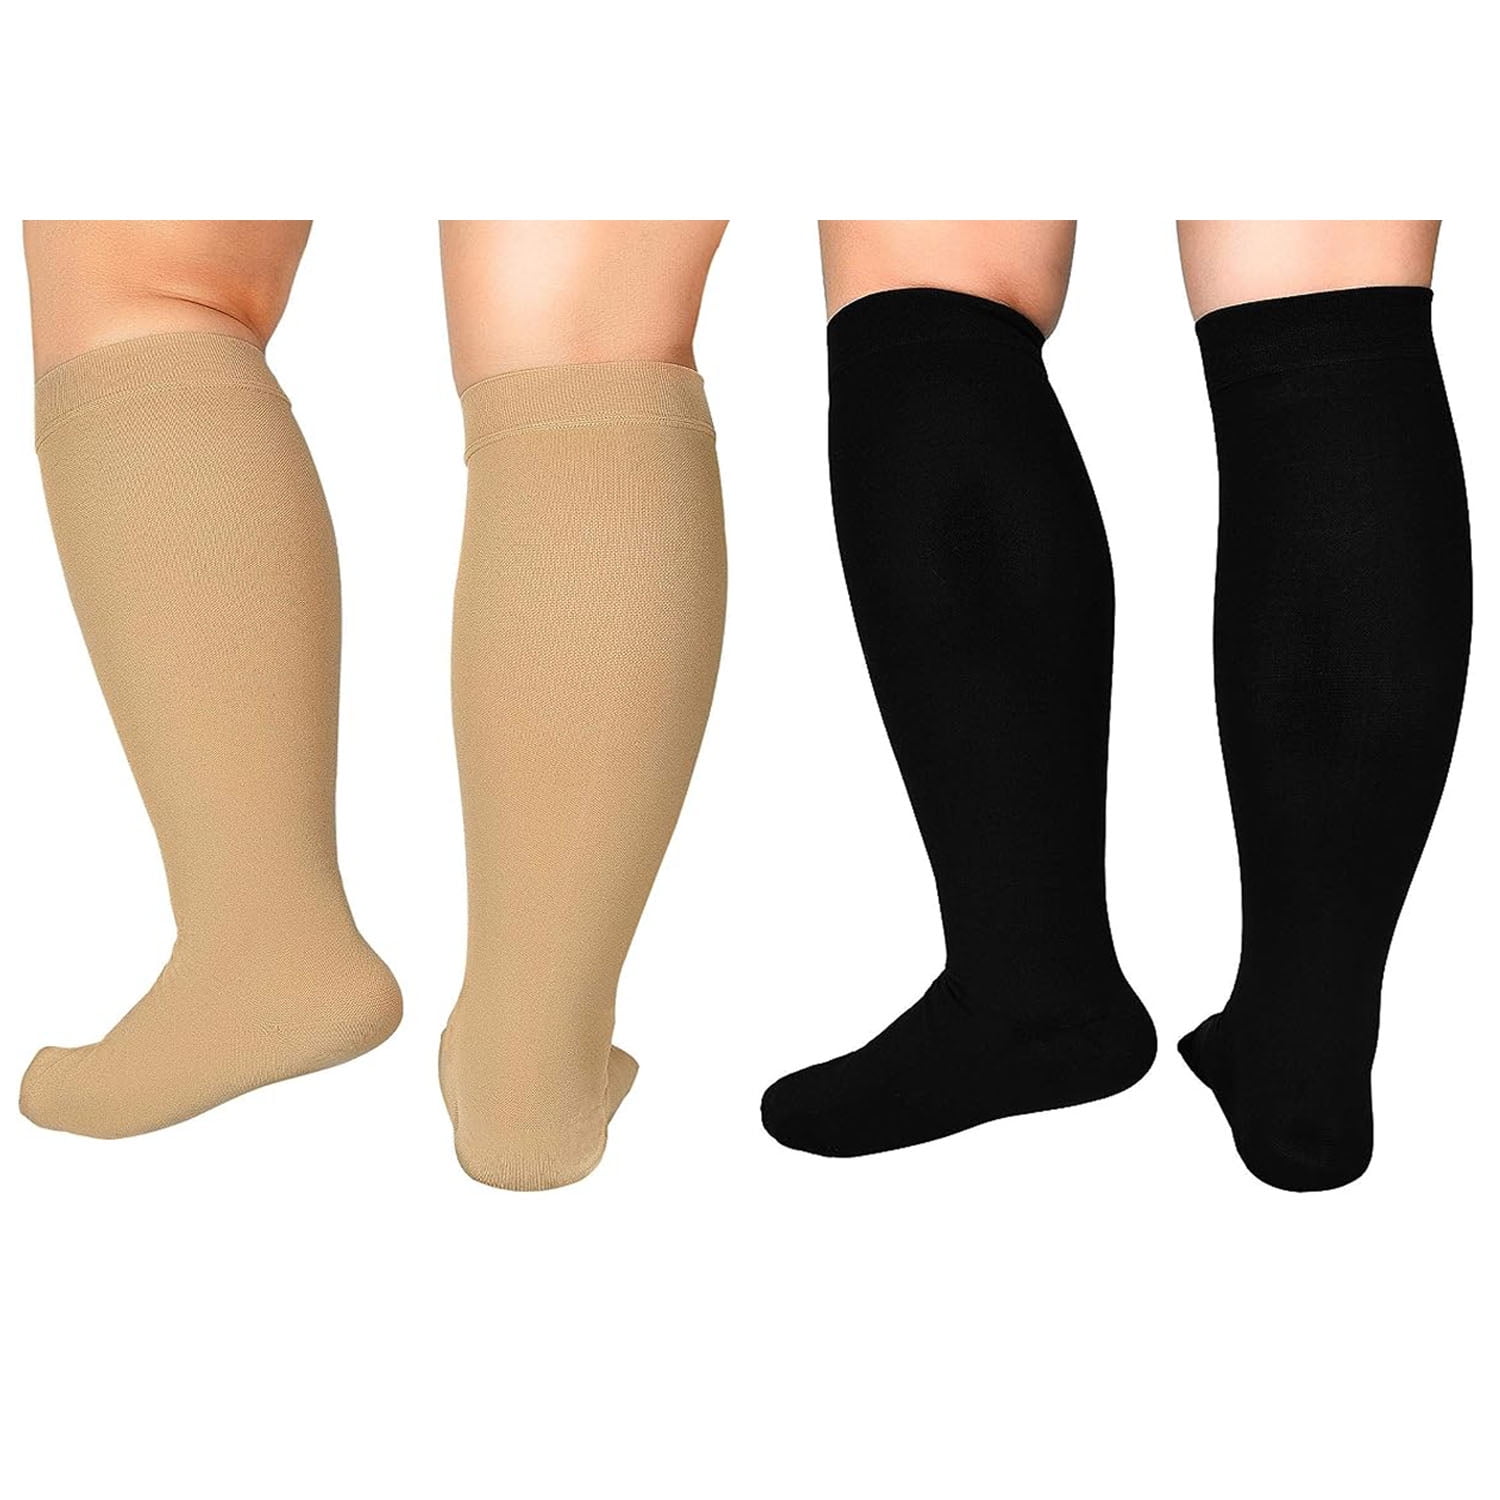 1 Pack Wukang 20-30mmHg Black 2XL Size Extra Wide Calf Compression Knee ...